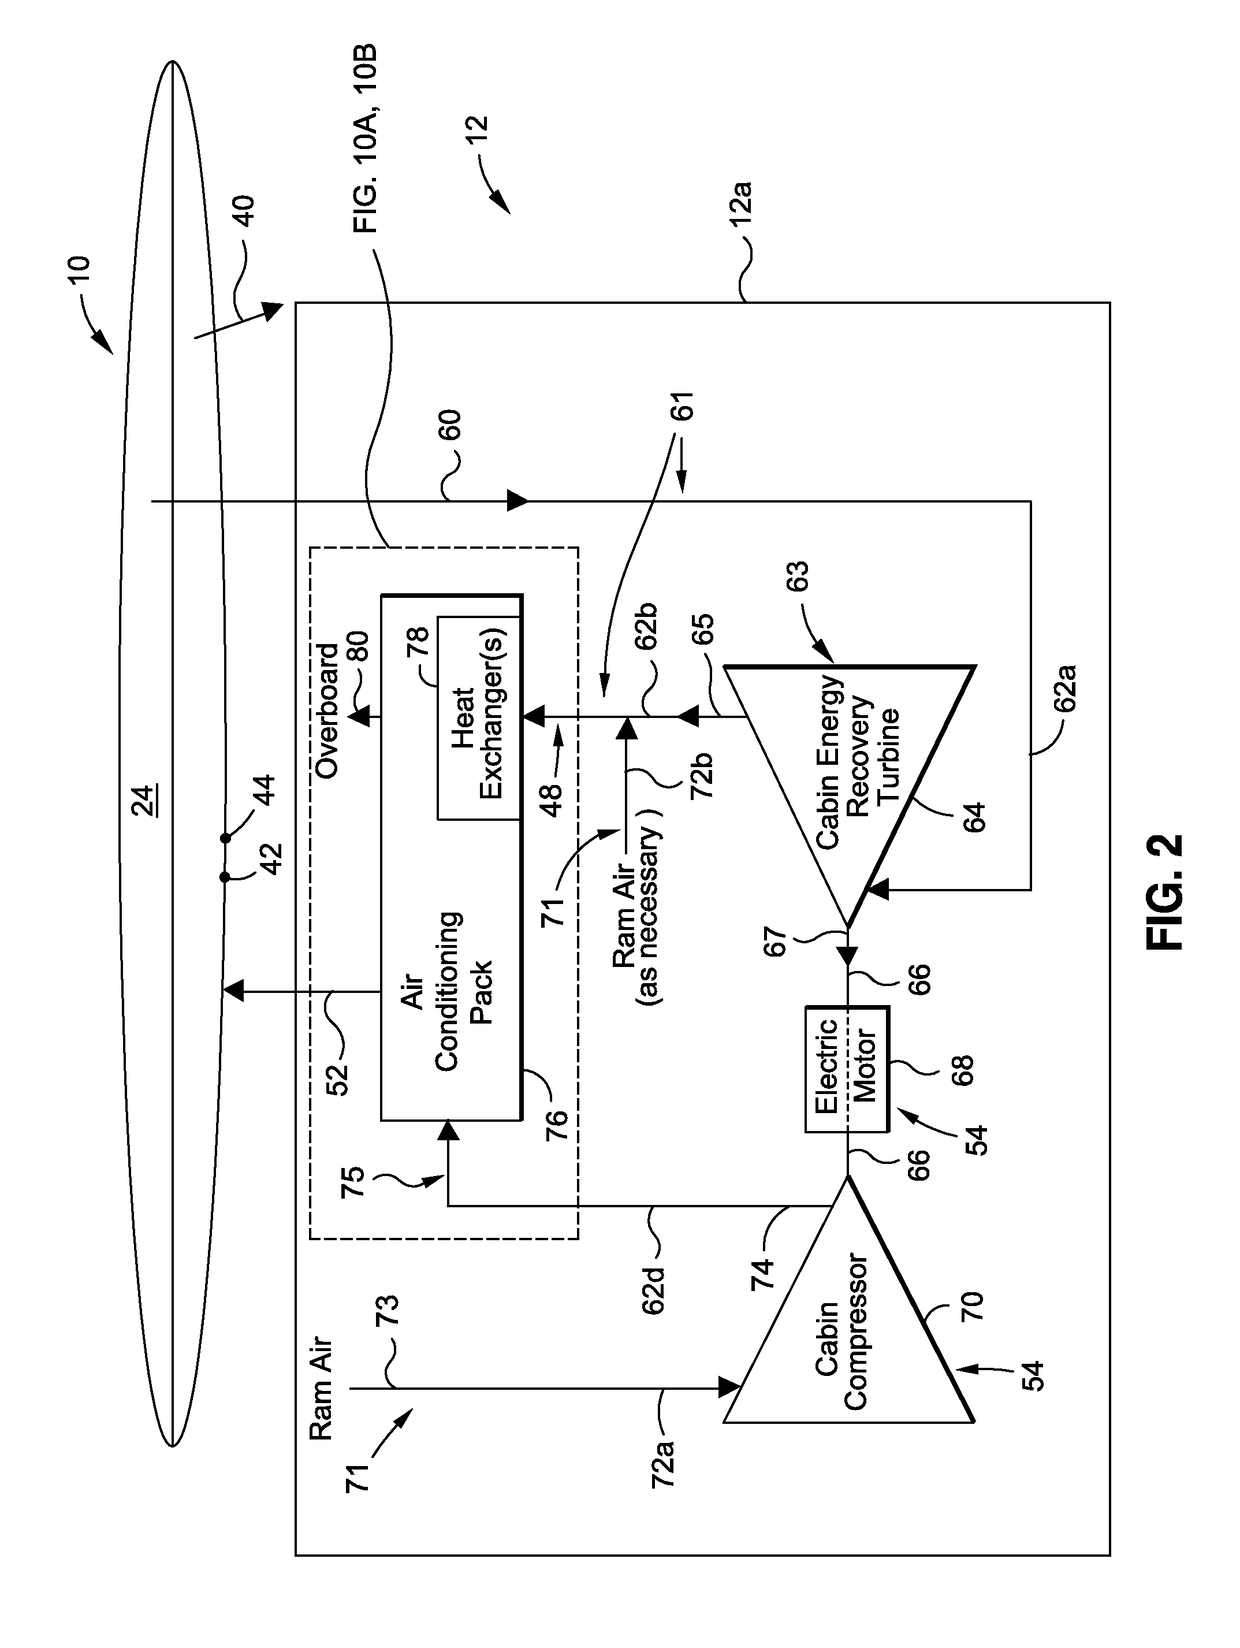 Aircraft air conditioning systems and methods